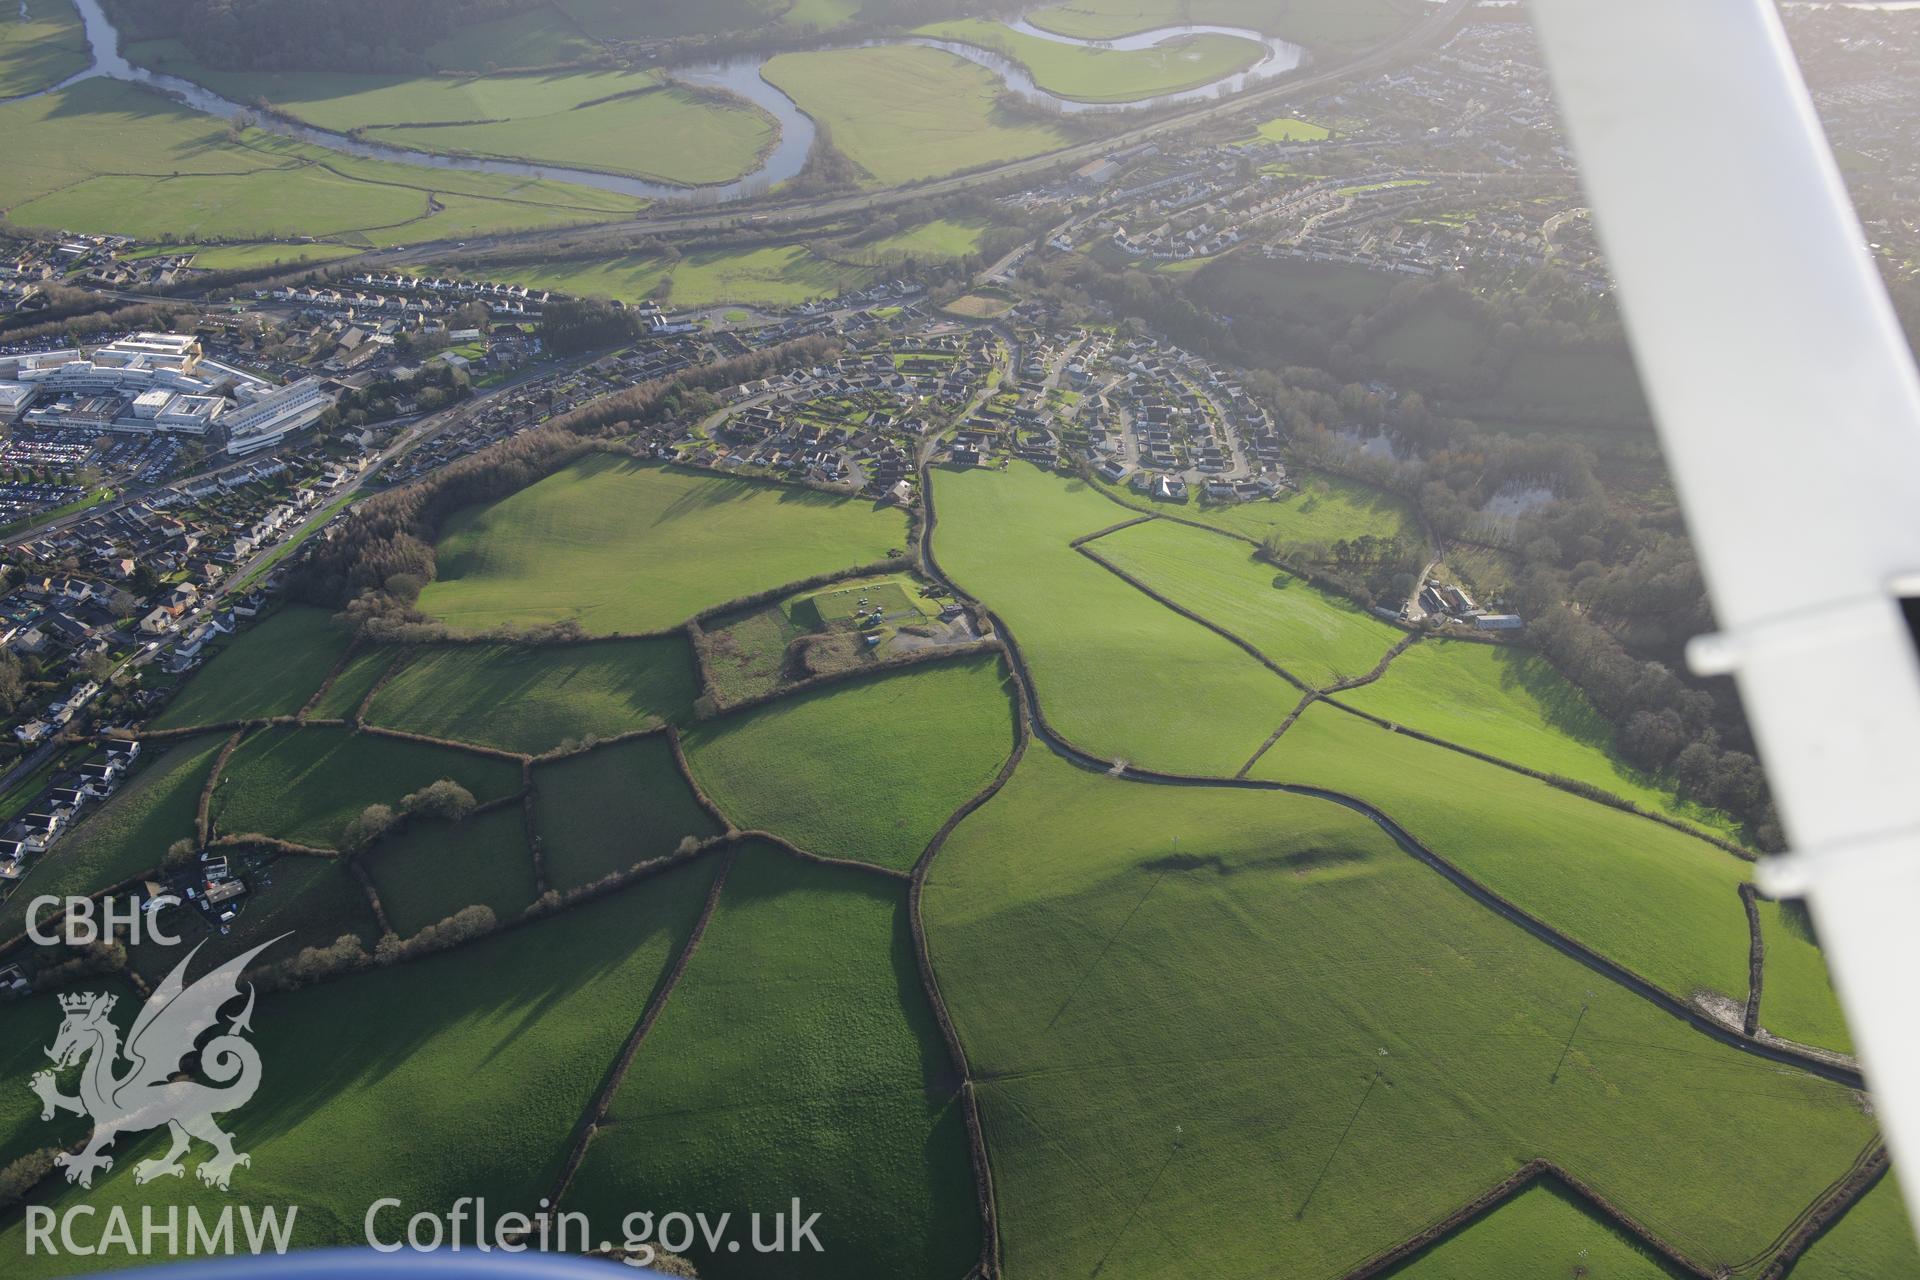 West Wales General Hospital and Cwm-oernant Reservoirs, Carmarthen. Oblique aerial photograph taken during the Royal Commission's programme of archaeological aerial reconnaissance by Toby Driver on 6th January 2015.